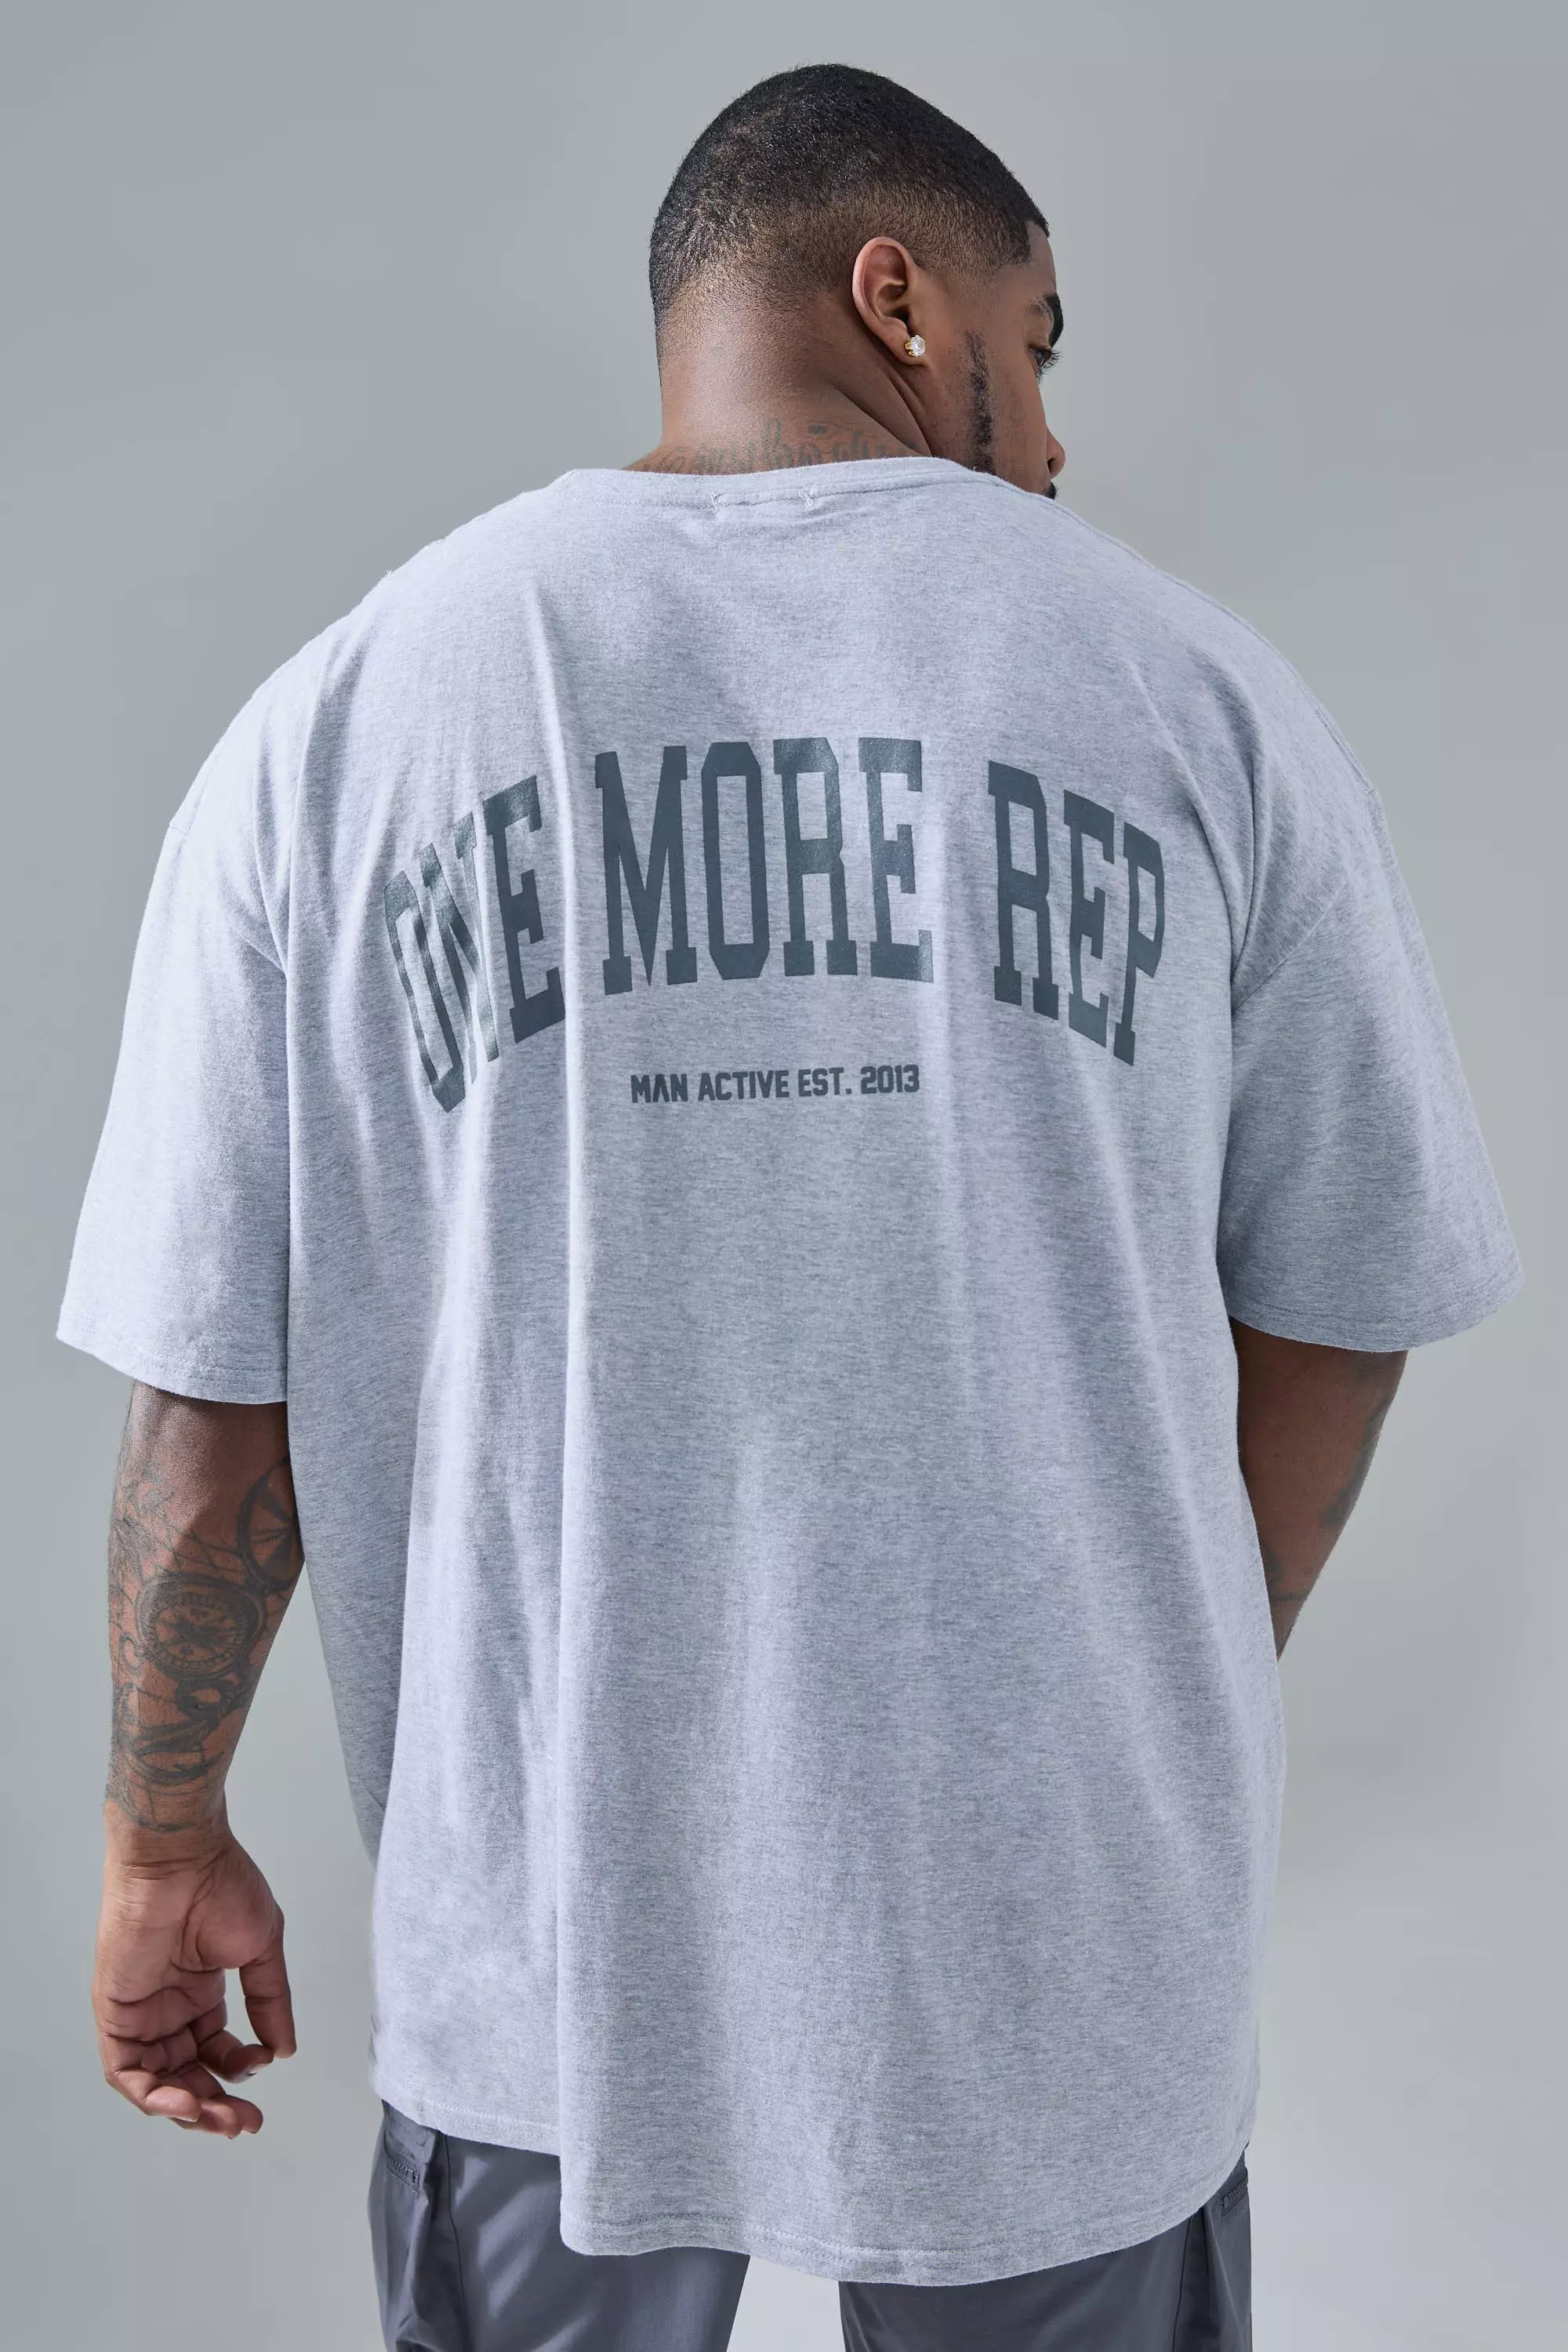 Grey Plus Man Active Oversized One More Rep T-shirt